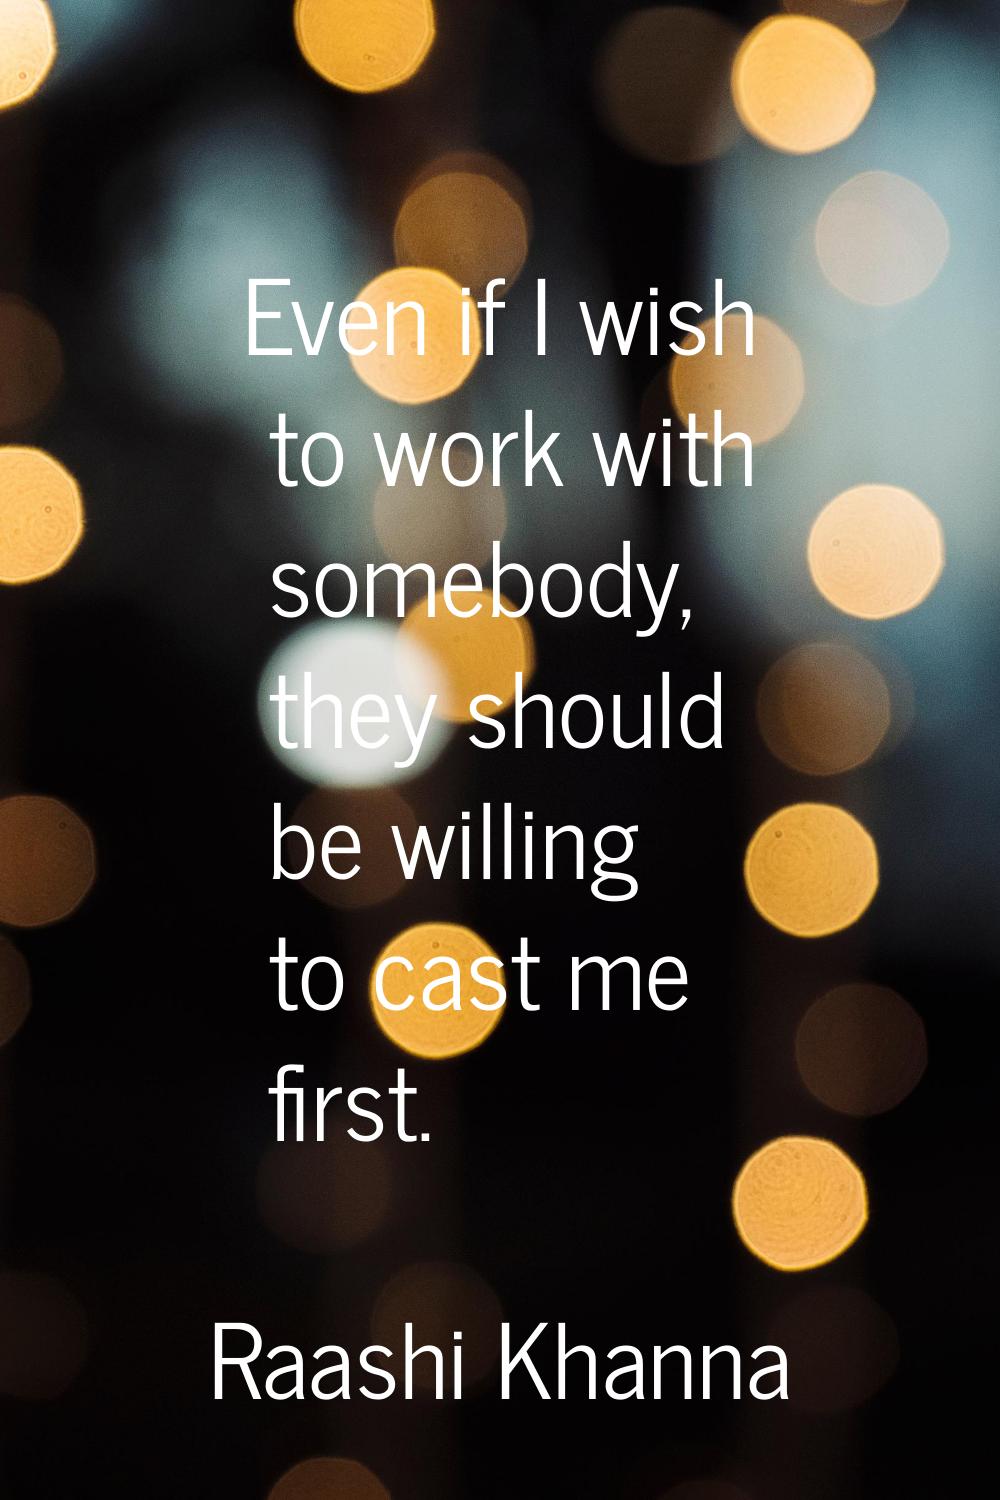 Even if I wish to work with somebody, they should be willing to cast me first.